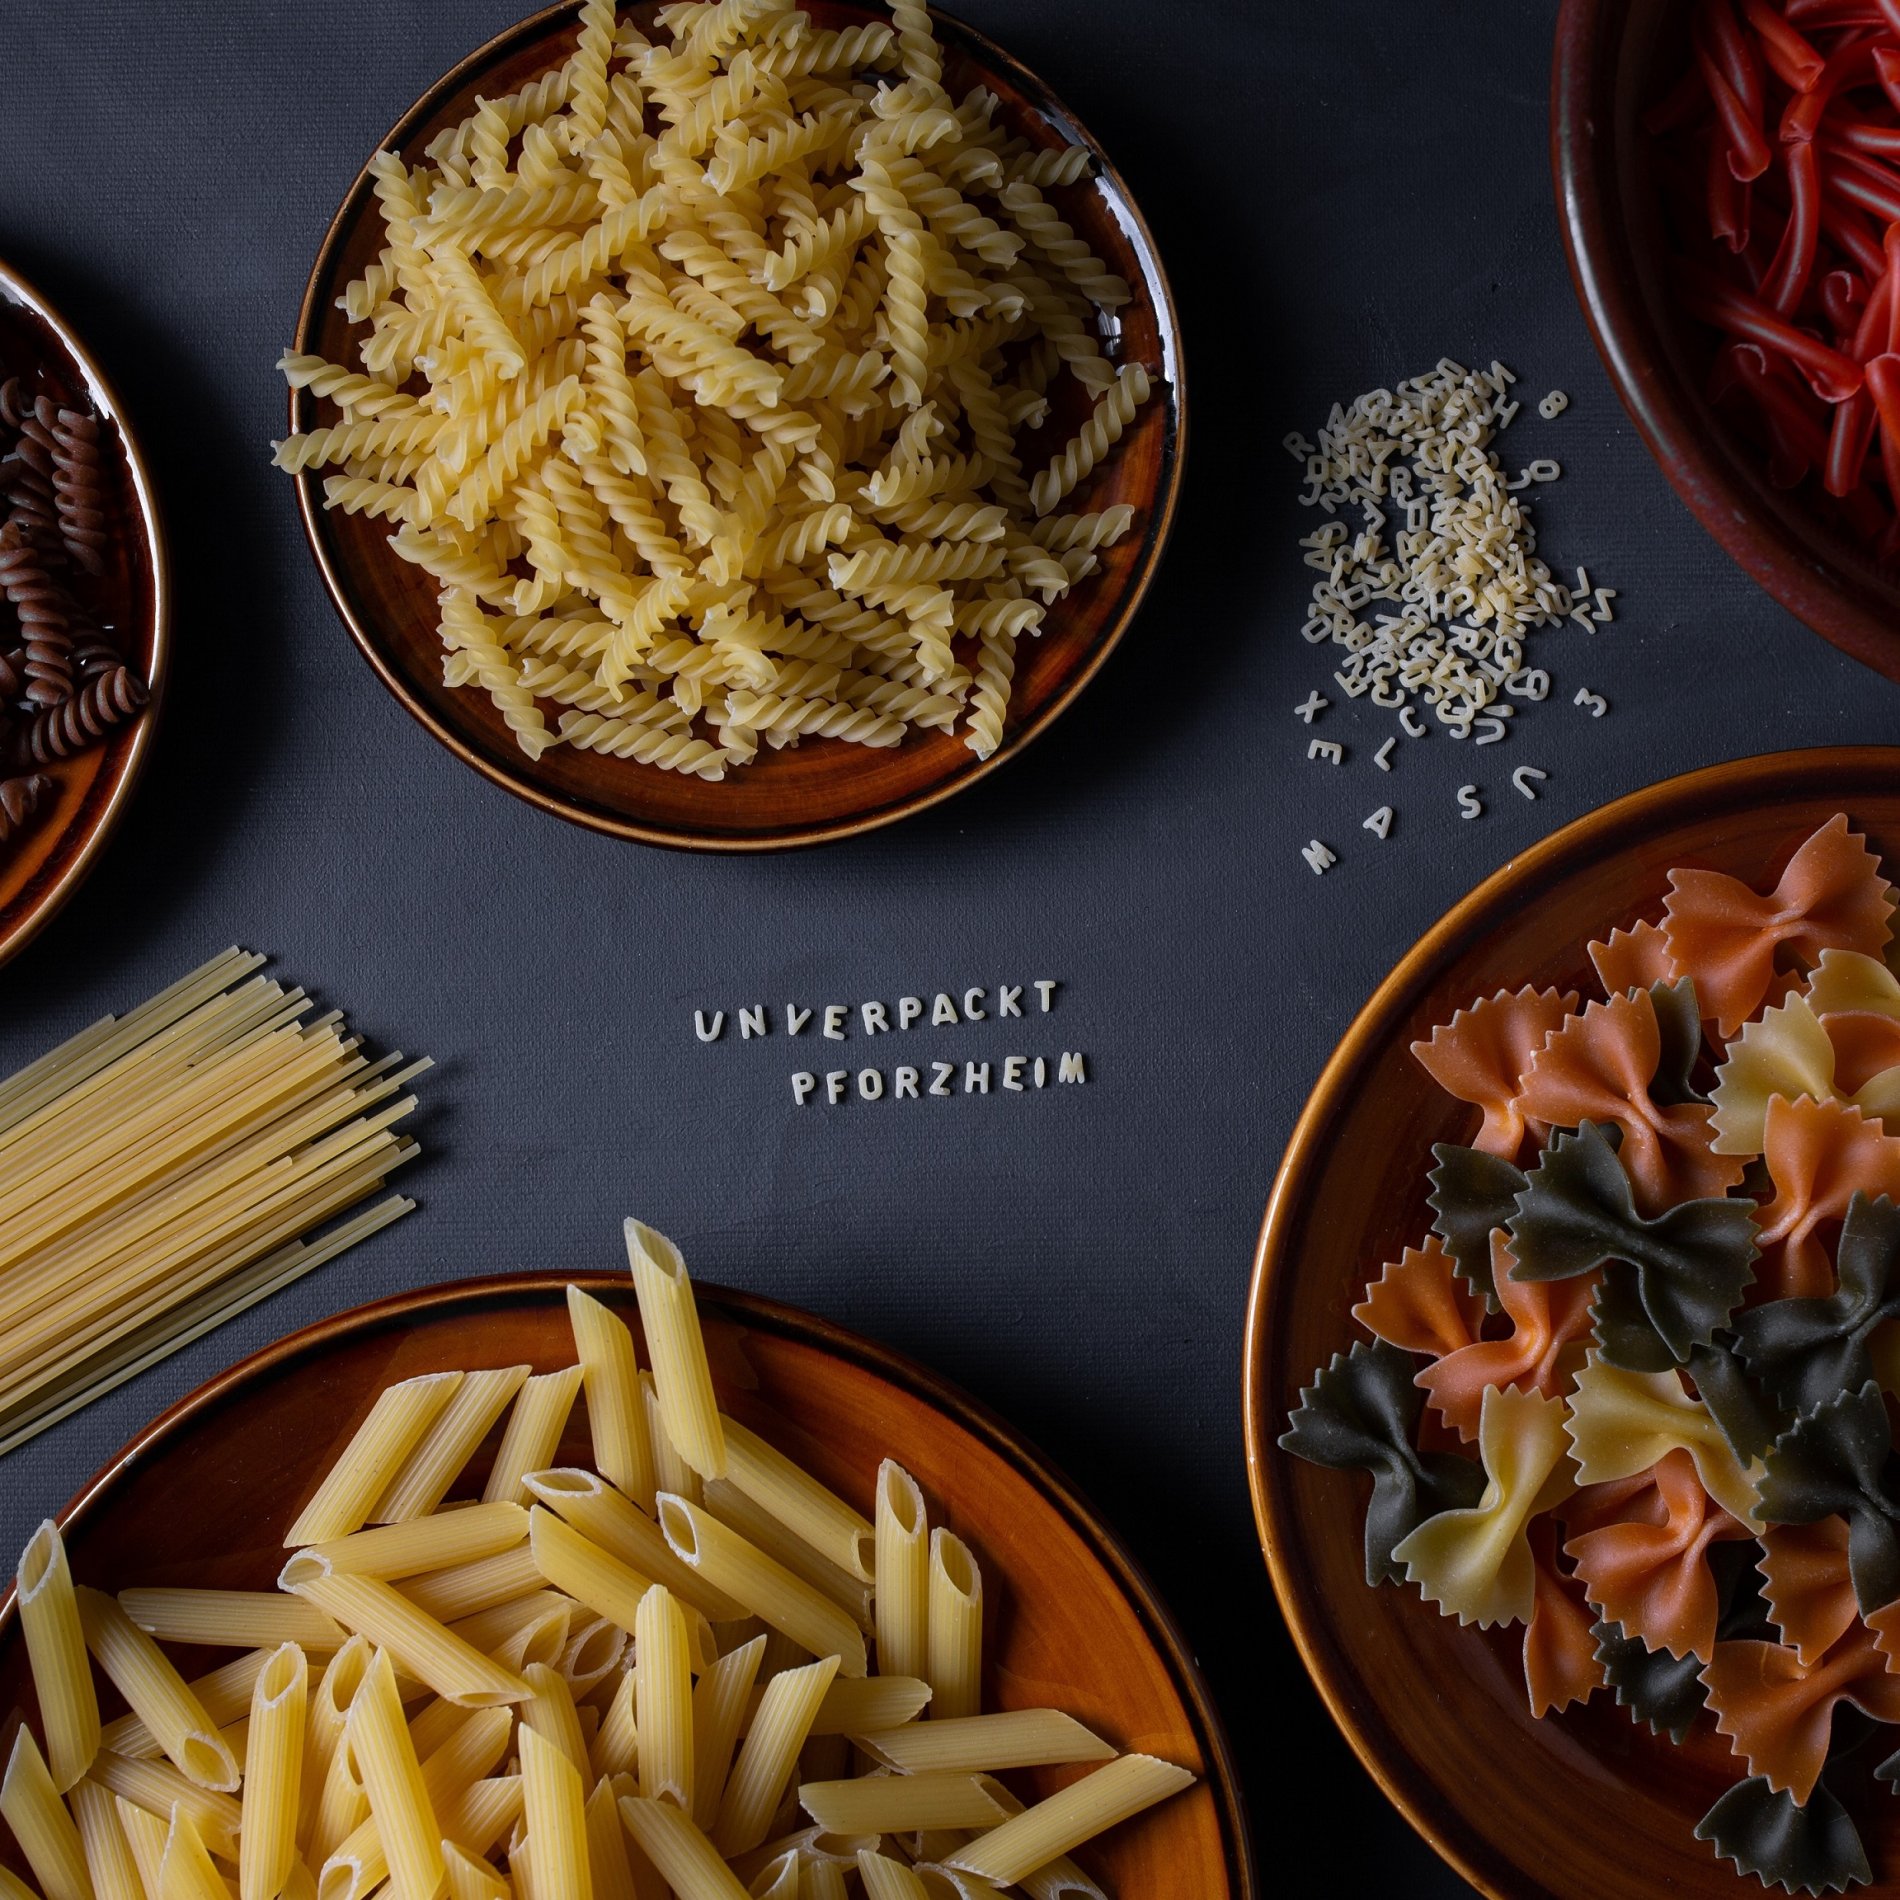 Various types of pasta and with letter noodles "Unverpackt Pforzheim".